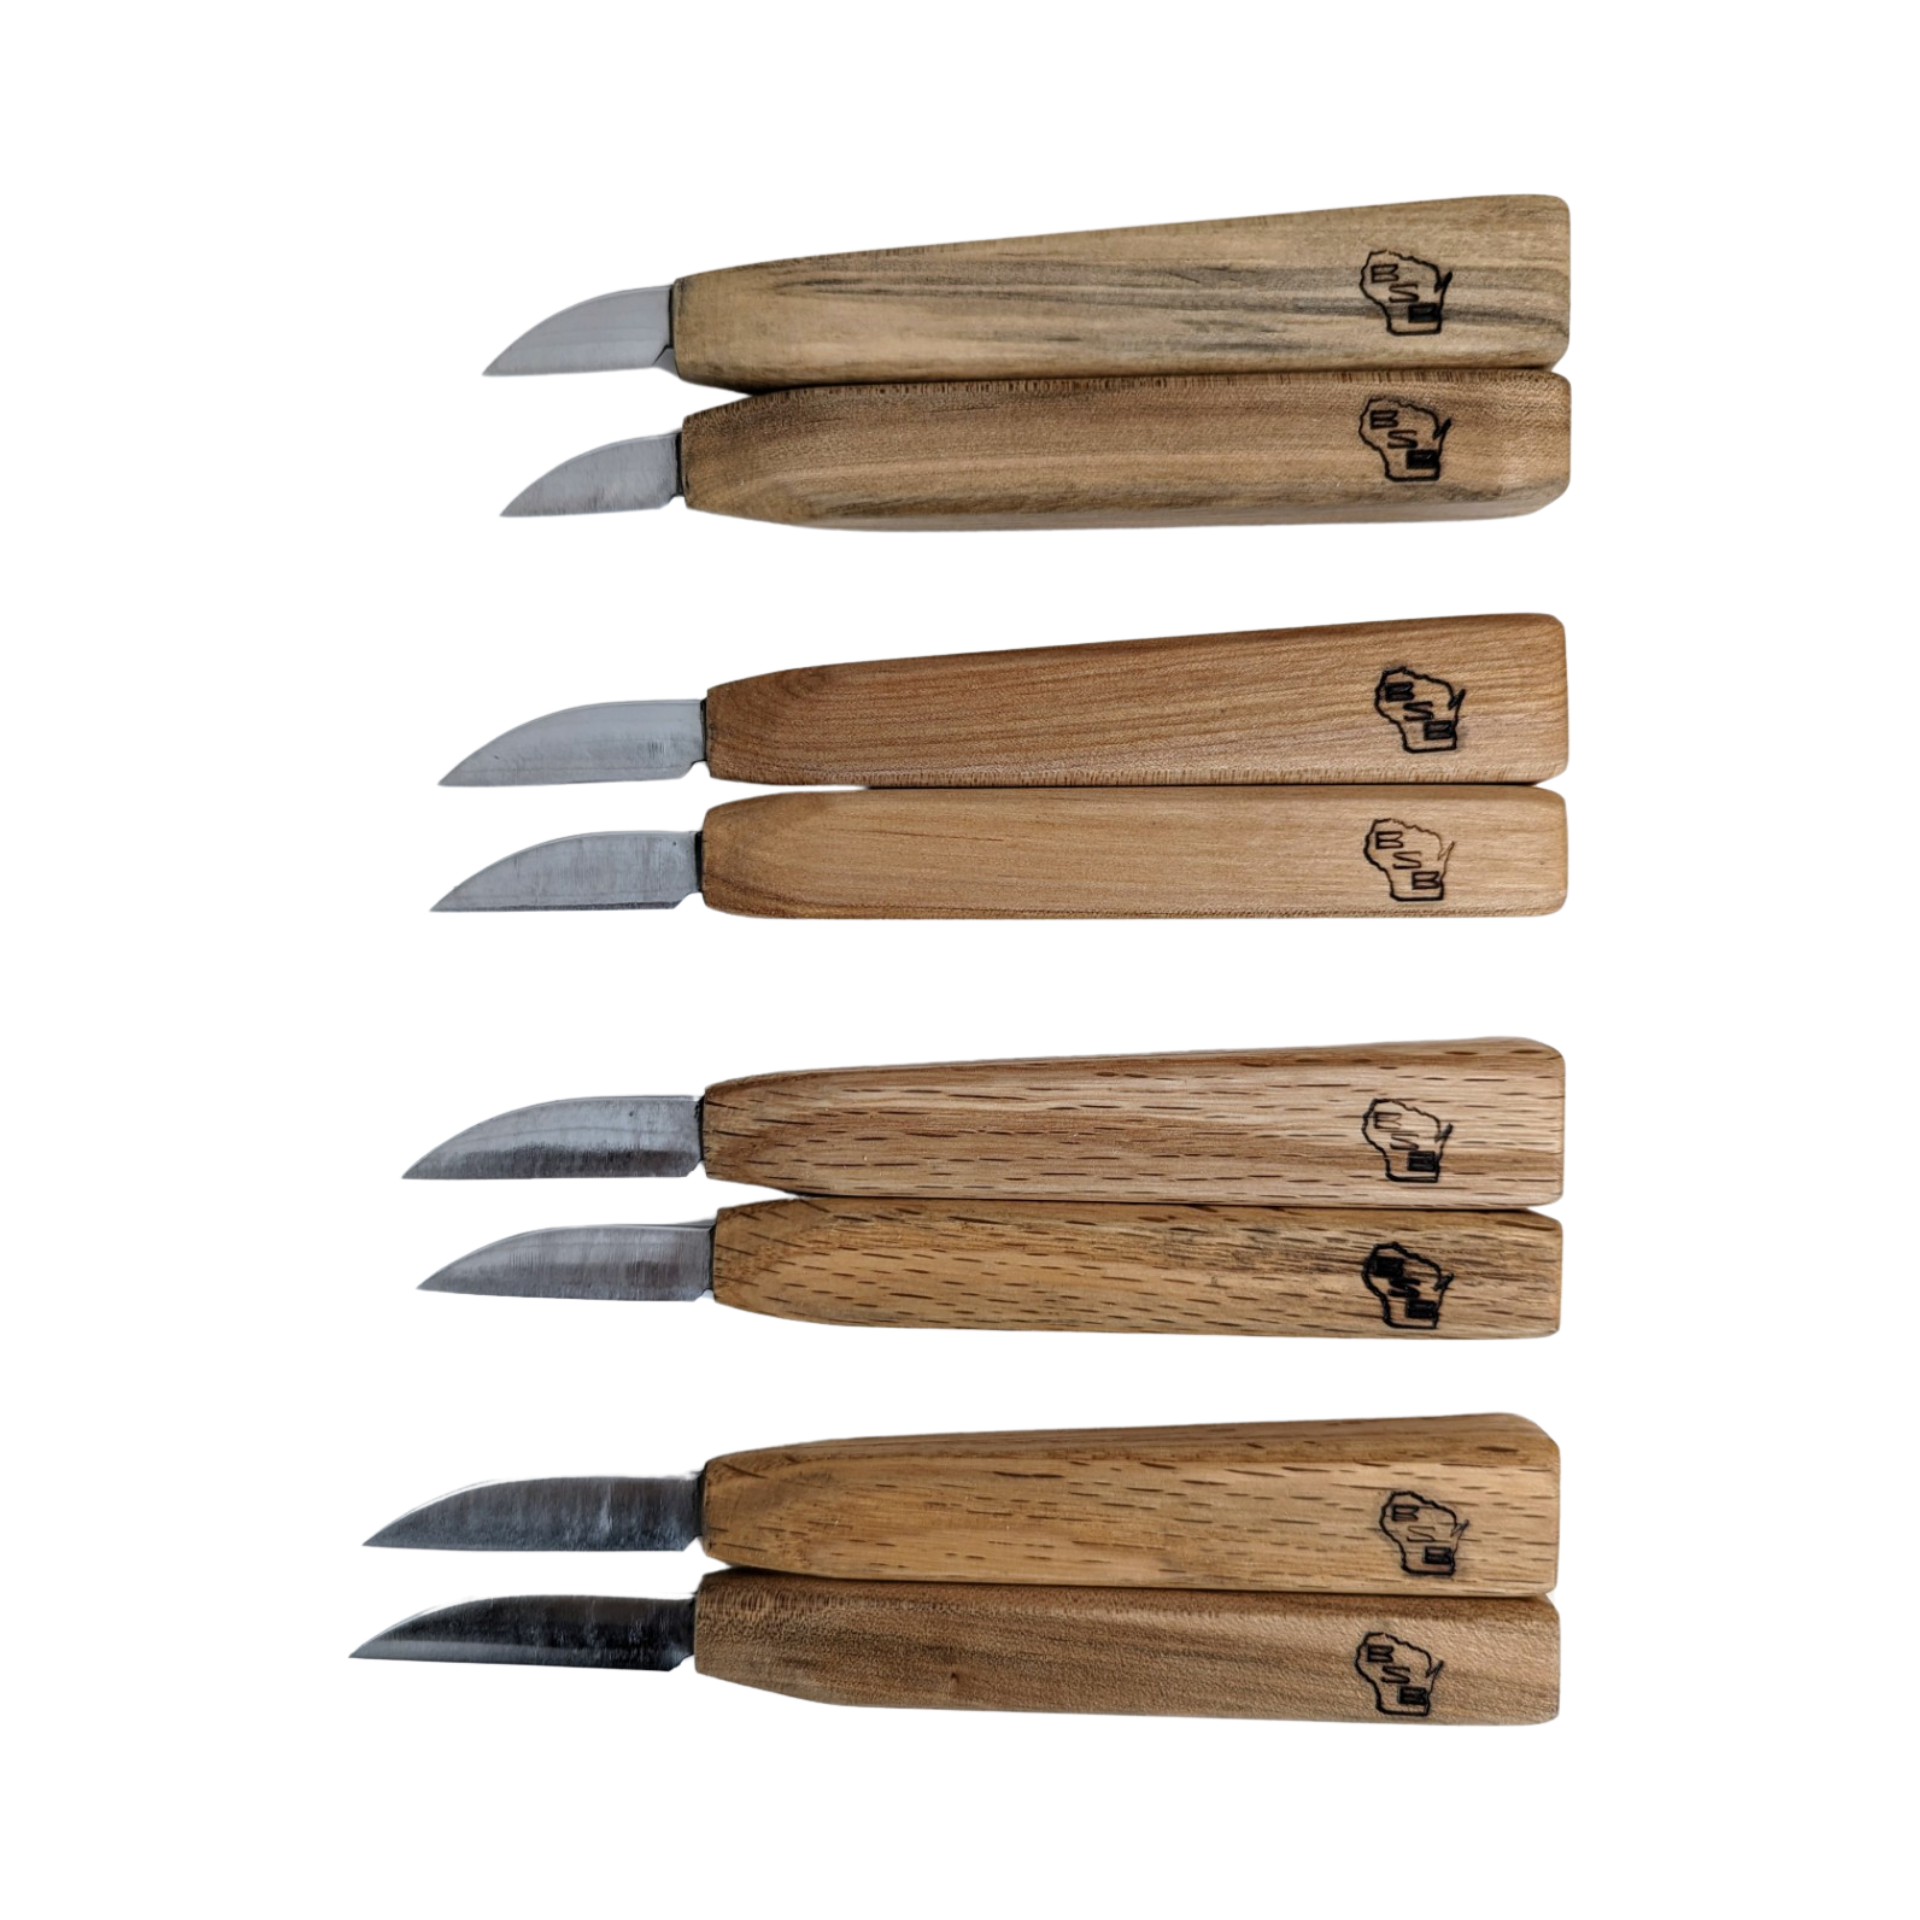 Wood Carving Tools Deluxe-Whittling Knife,Wood Carving Kit,Wood